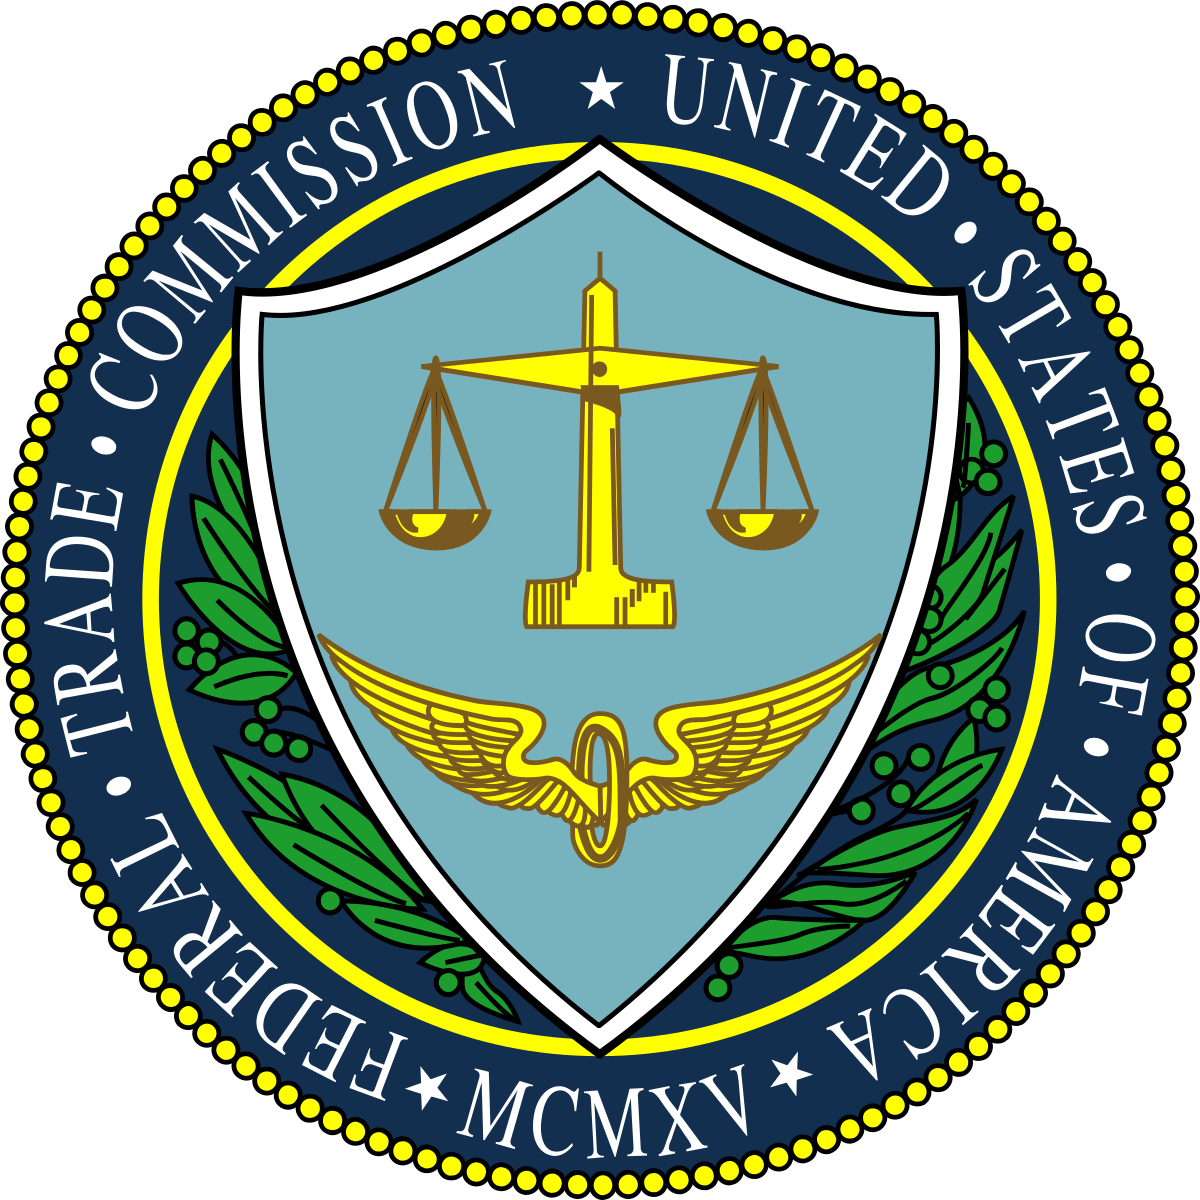 Federal Trade Commission - Wikipedia